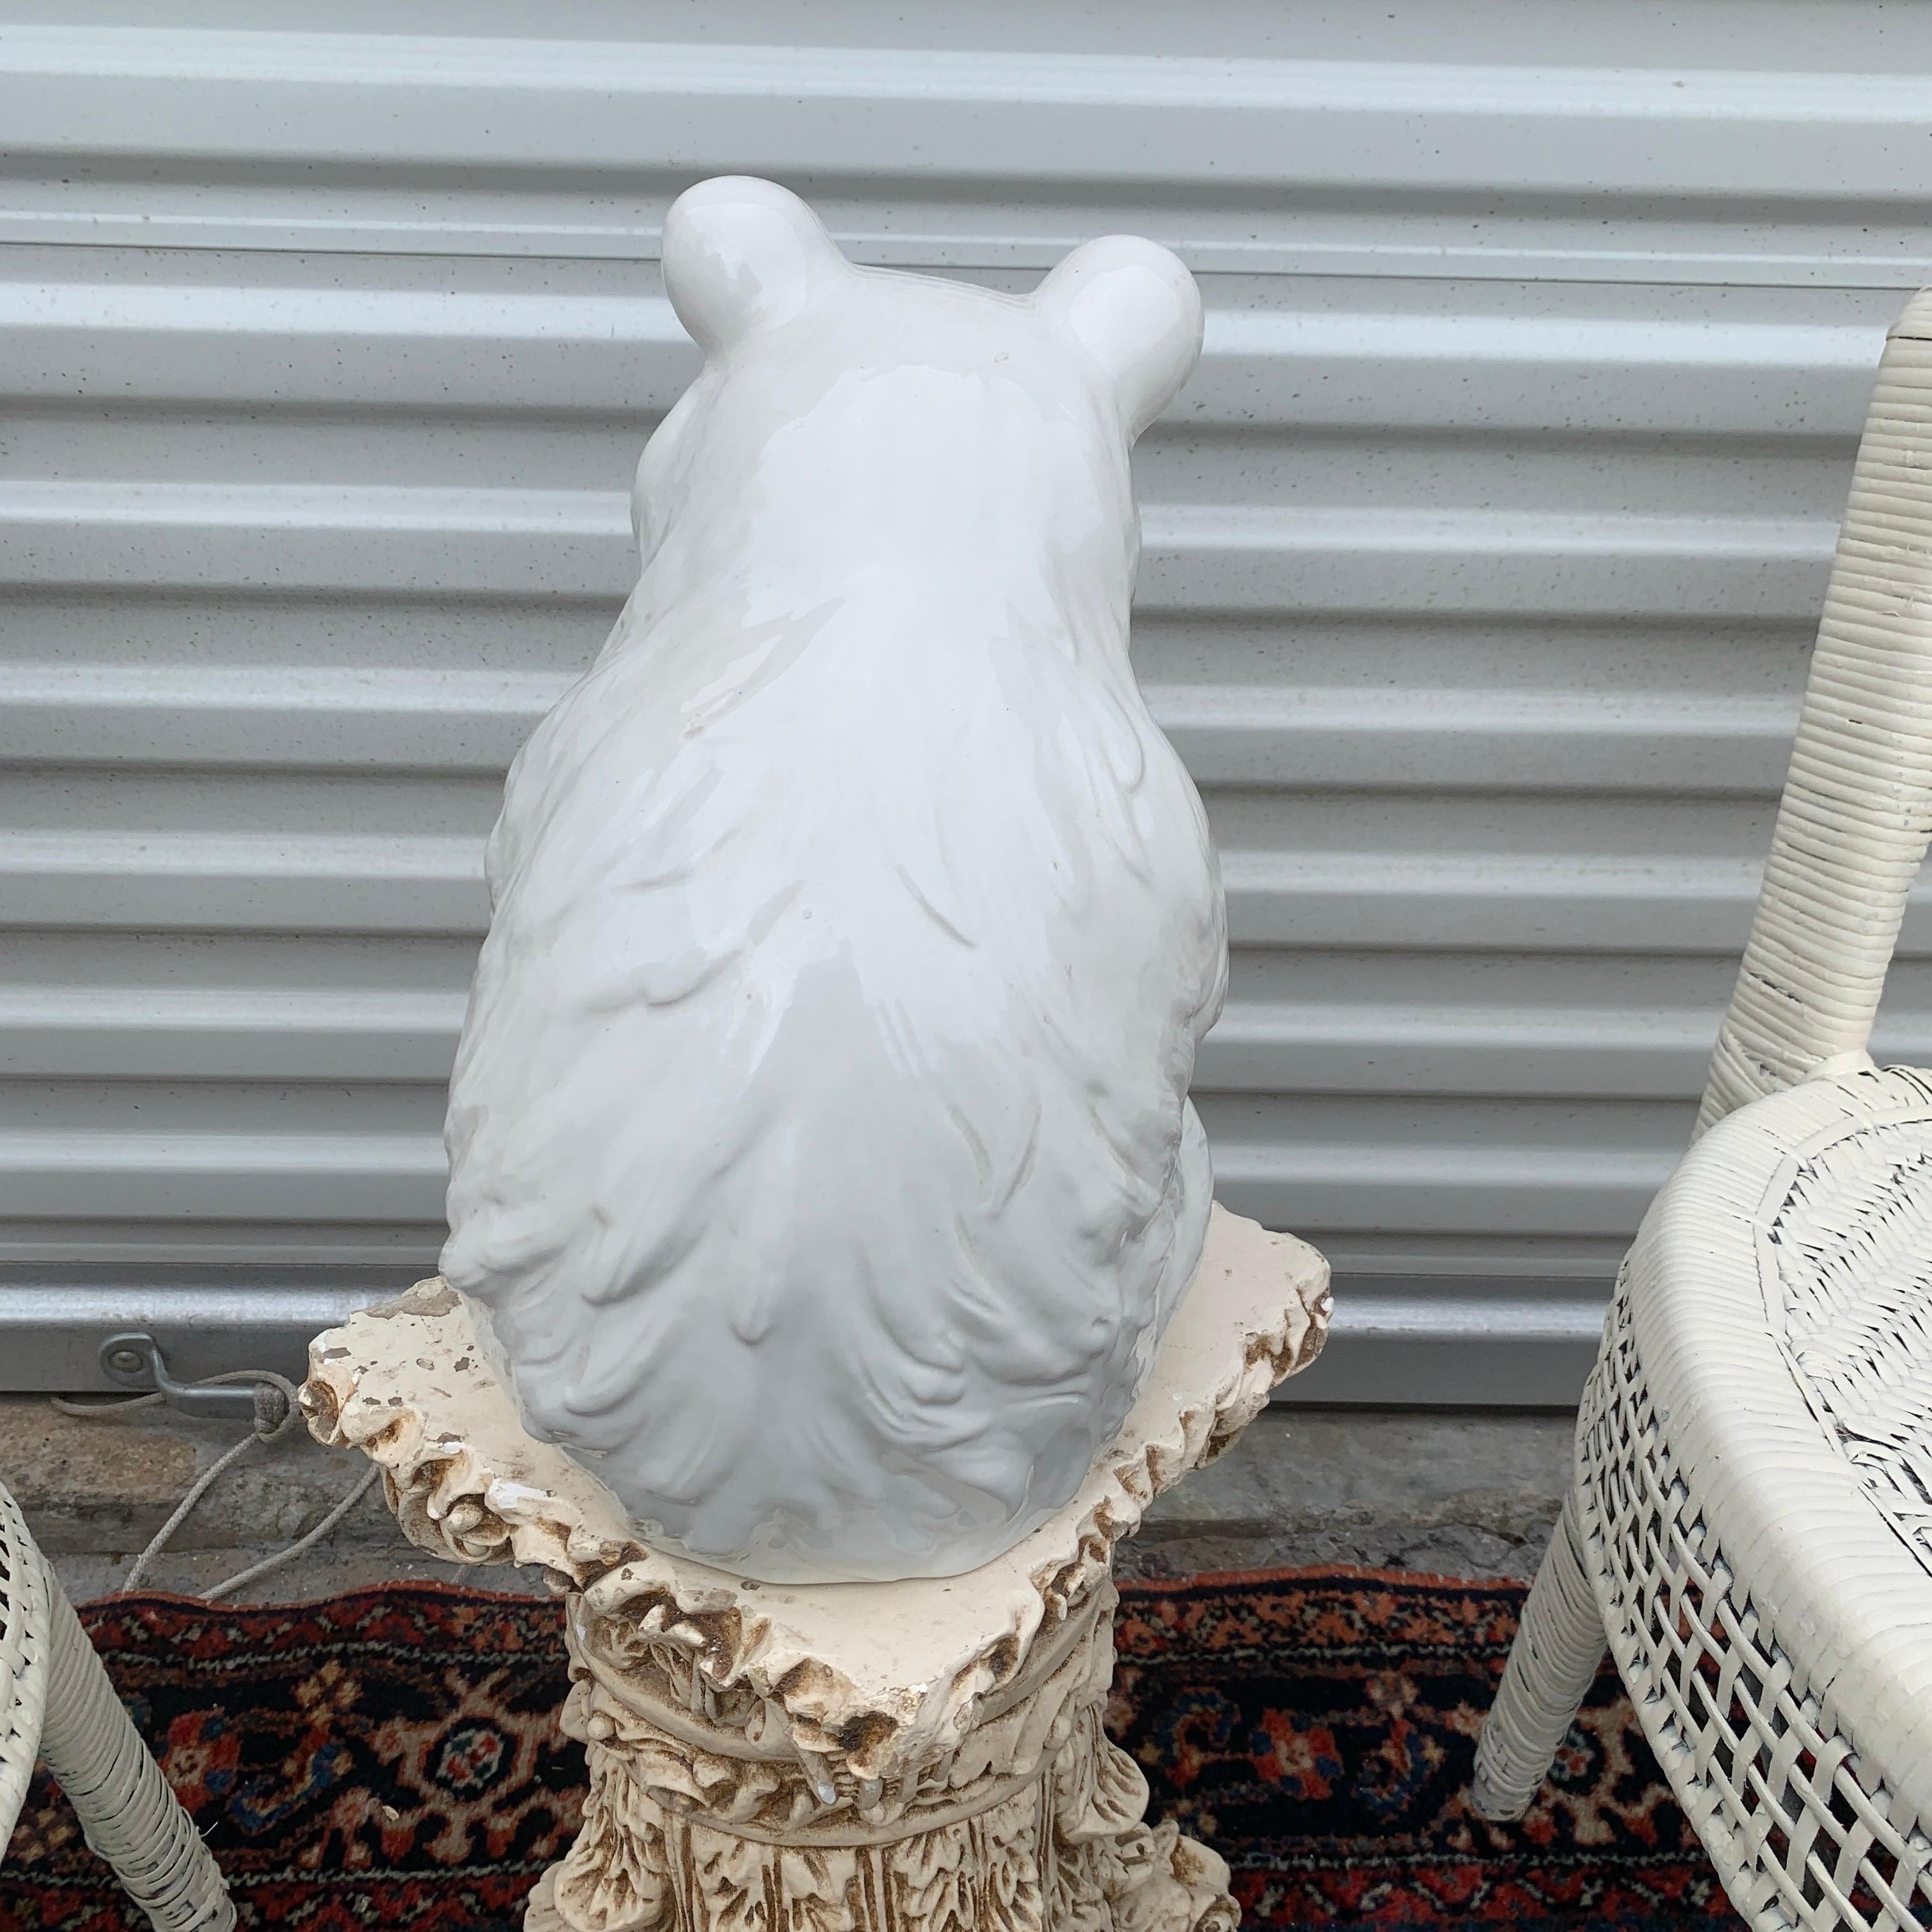 Circa 1980s white ceramic Italian (signed) decorative object / sculpture. This piece is in over all good condition with one small blemish on the back. This may be a defect from the firing process, it's hard to tell. Signed Italy on the base. Totally